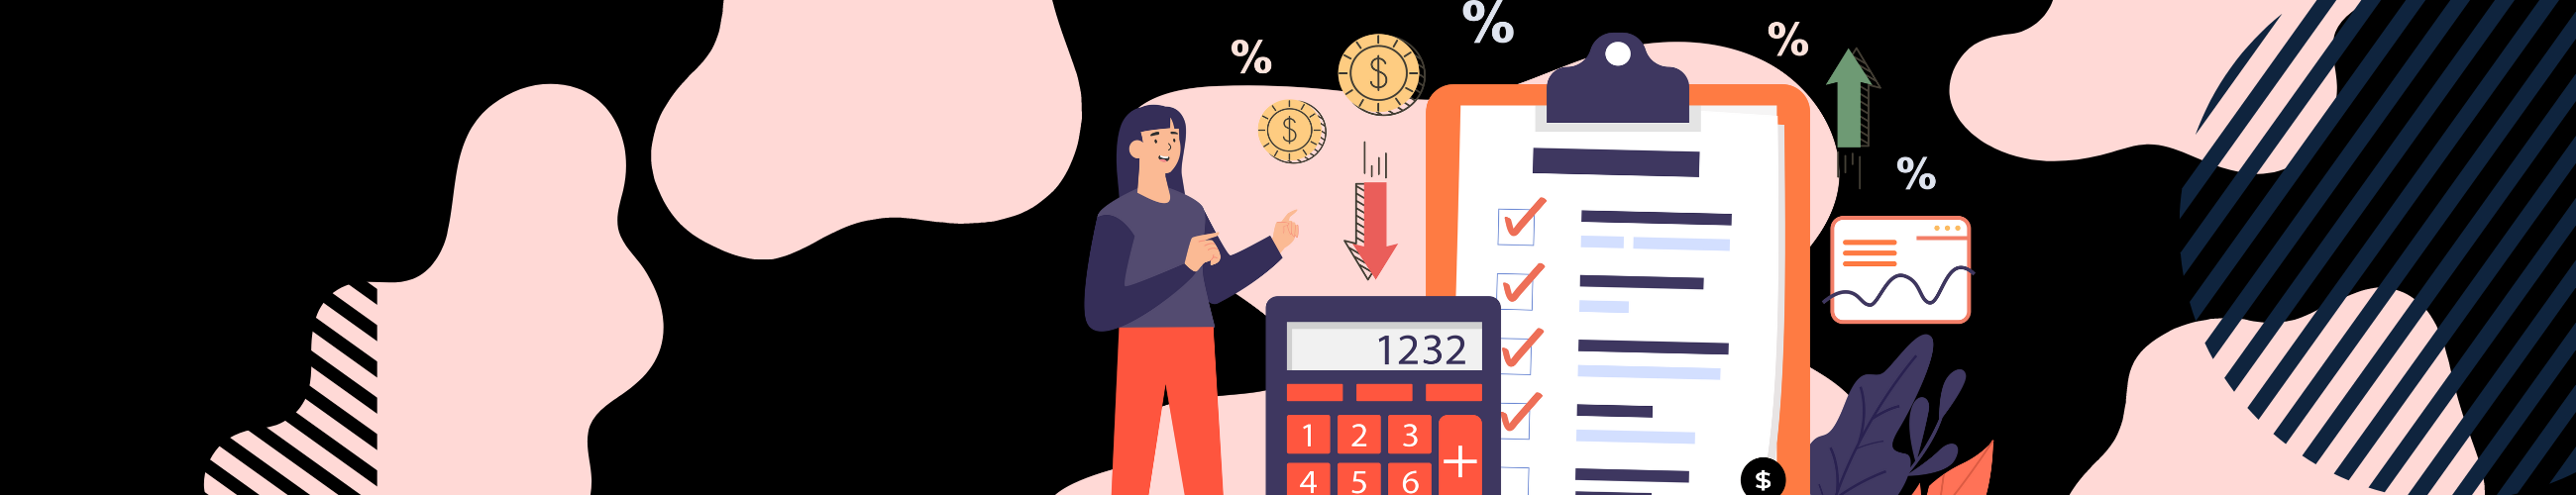 Illustration of a person pointing at calculator, money and a checklist